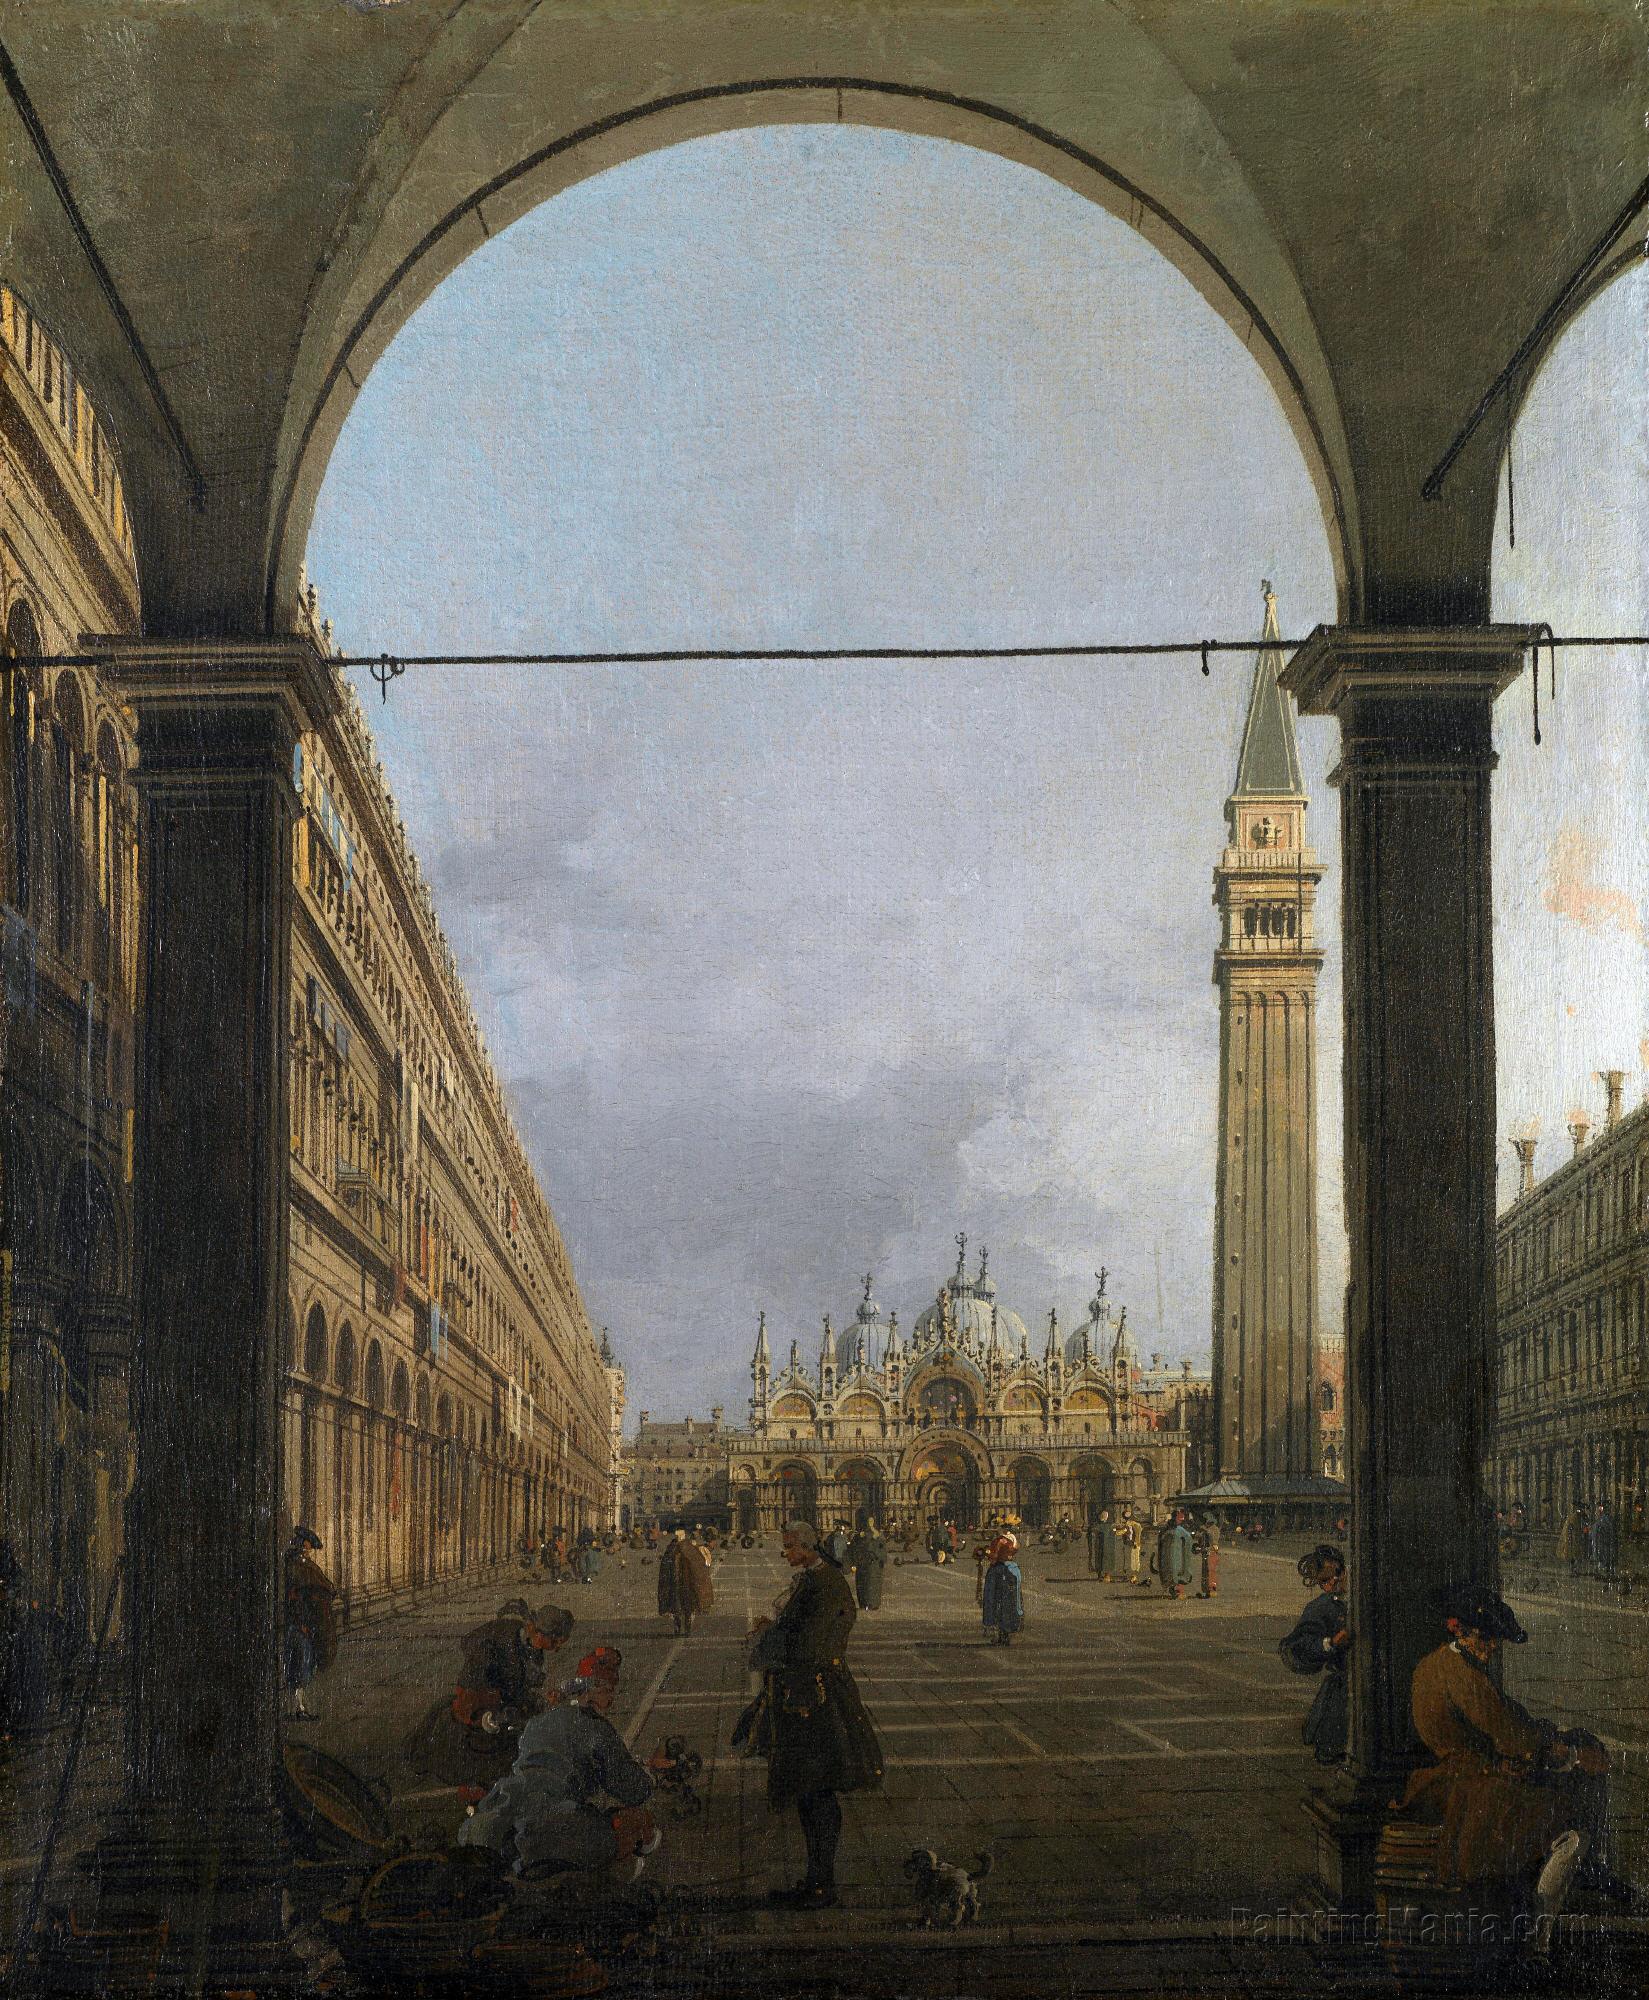 Piazza San Marco Looking East from the North-West Corner